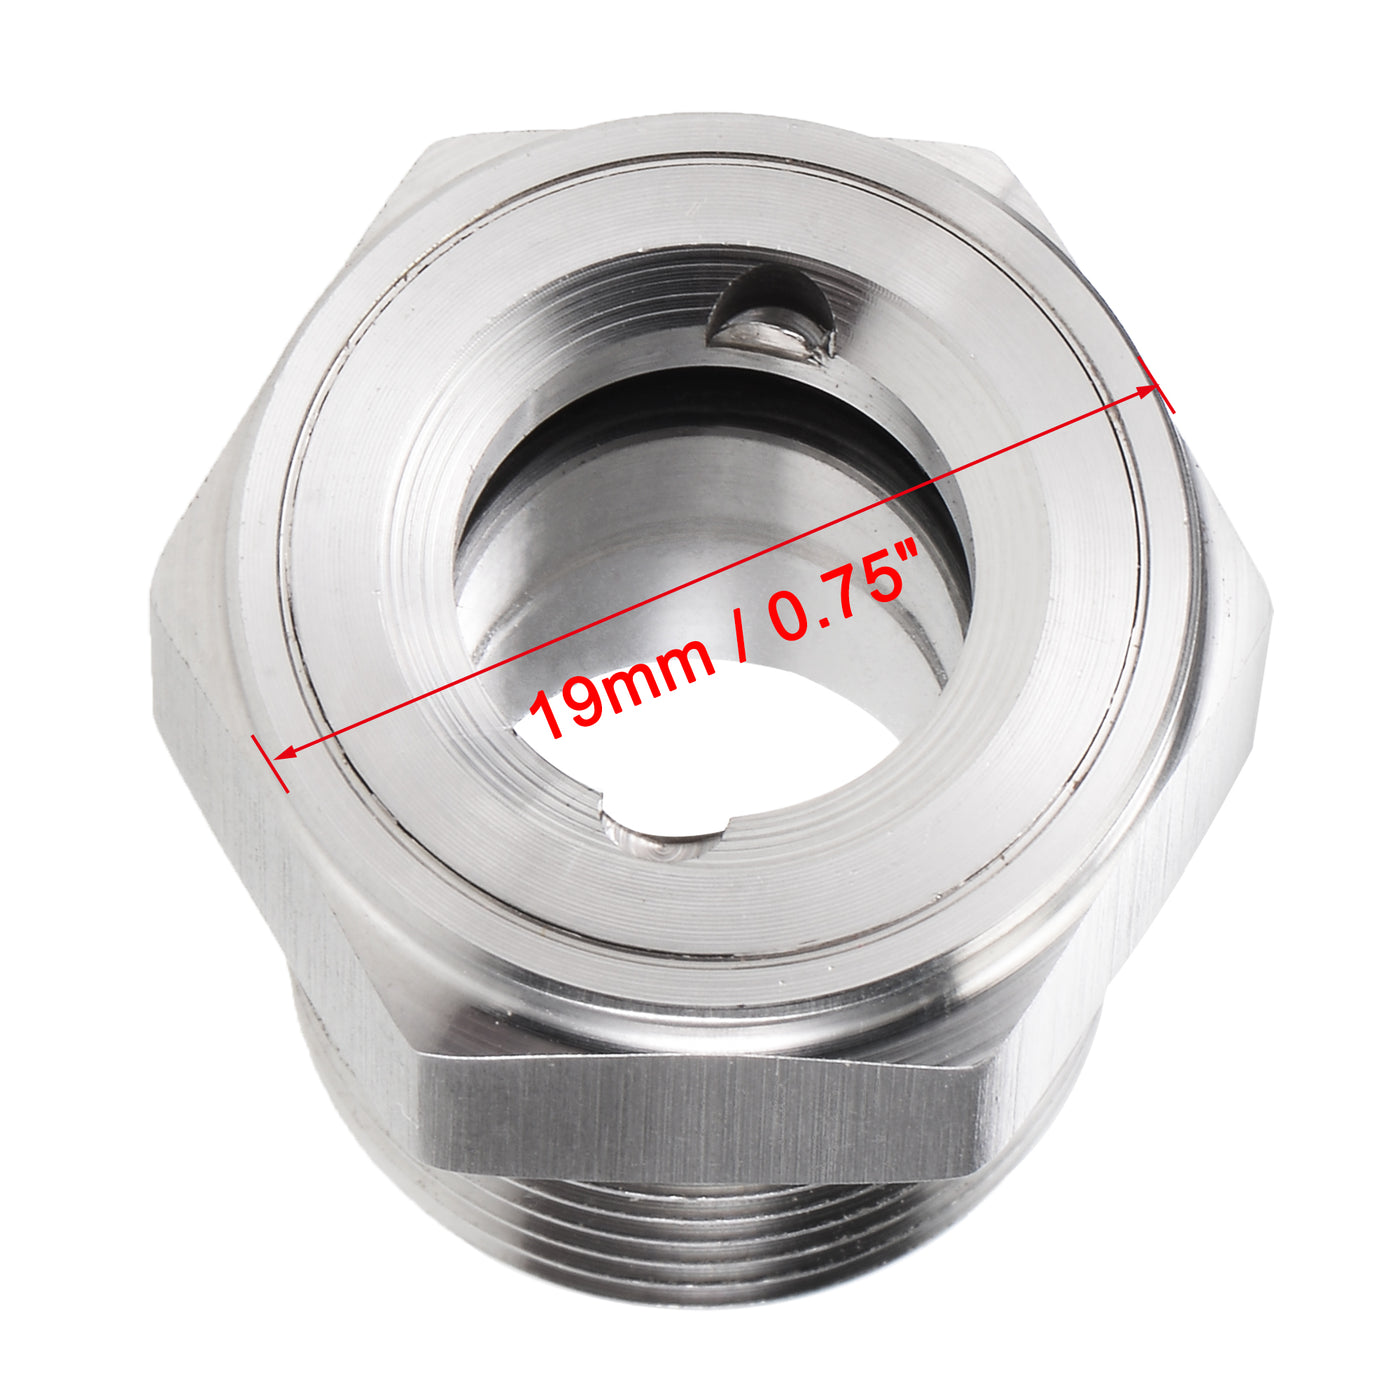 uxcell Uxcell Oil Liquid Level Gauge Sight Glass NPT Male Threaded 304 Stainless Steel Air Compressor Fittings, Silver Tone